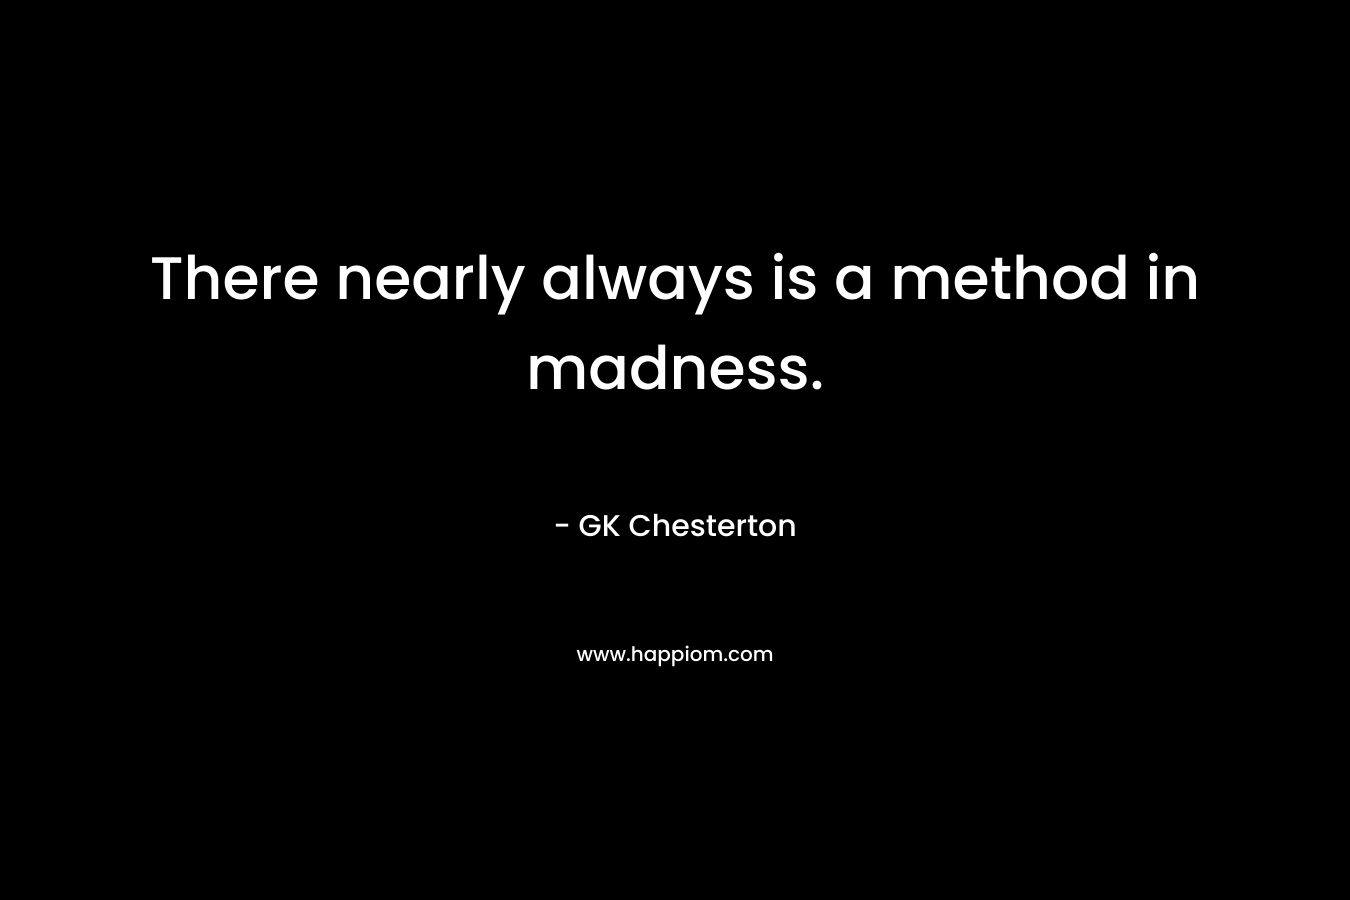 There nearly always is a method in madness.